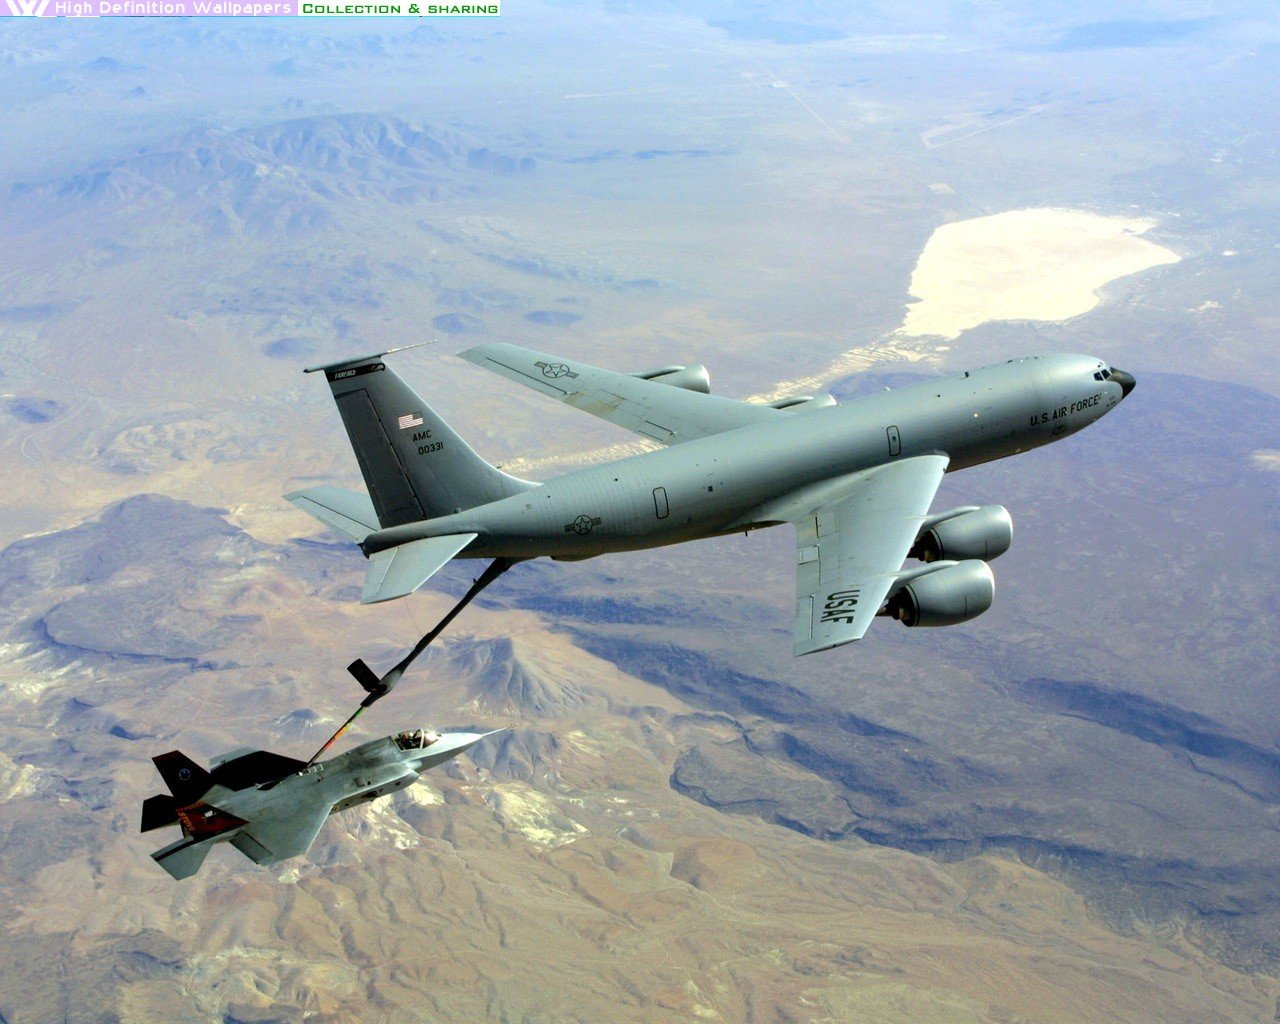 US Air Force Wallpaper 1280x1024 US Air ForceX35 fightermilitary